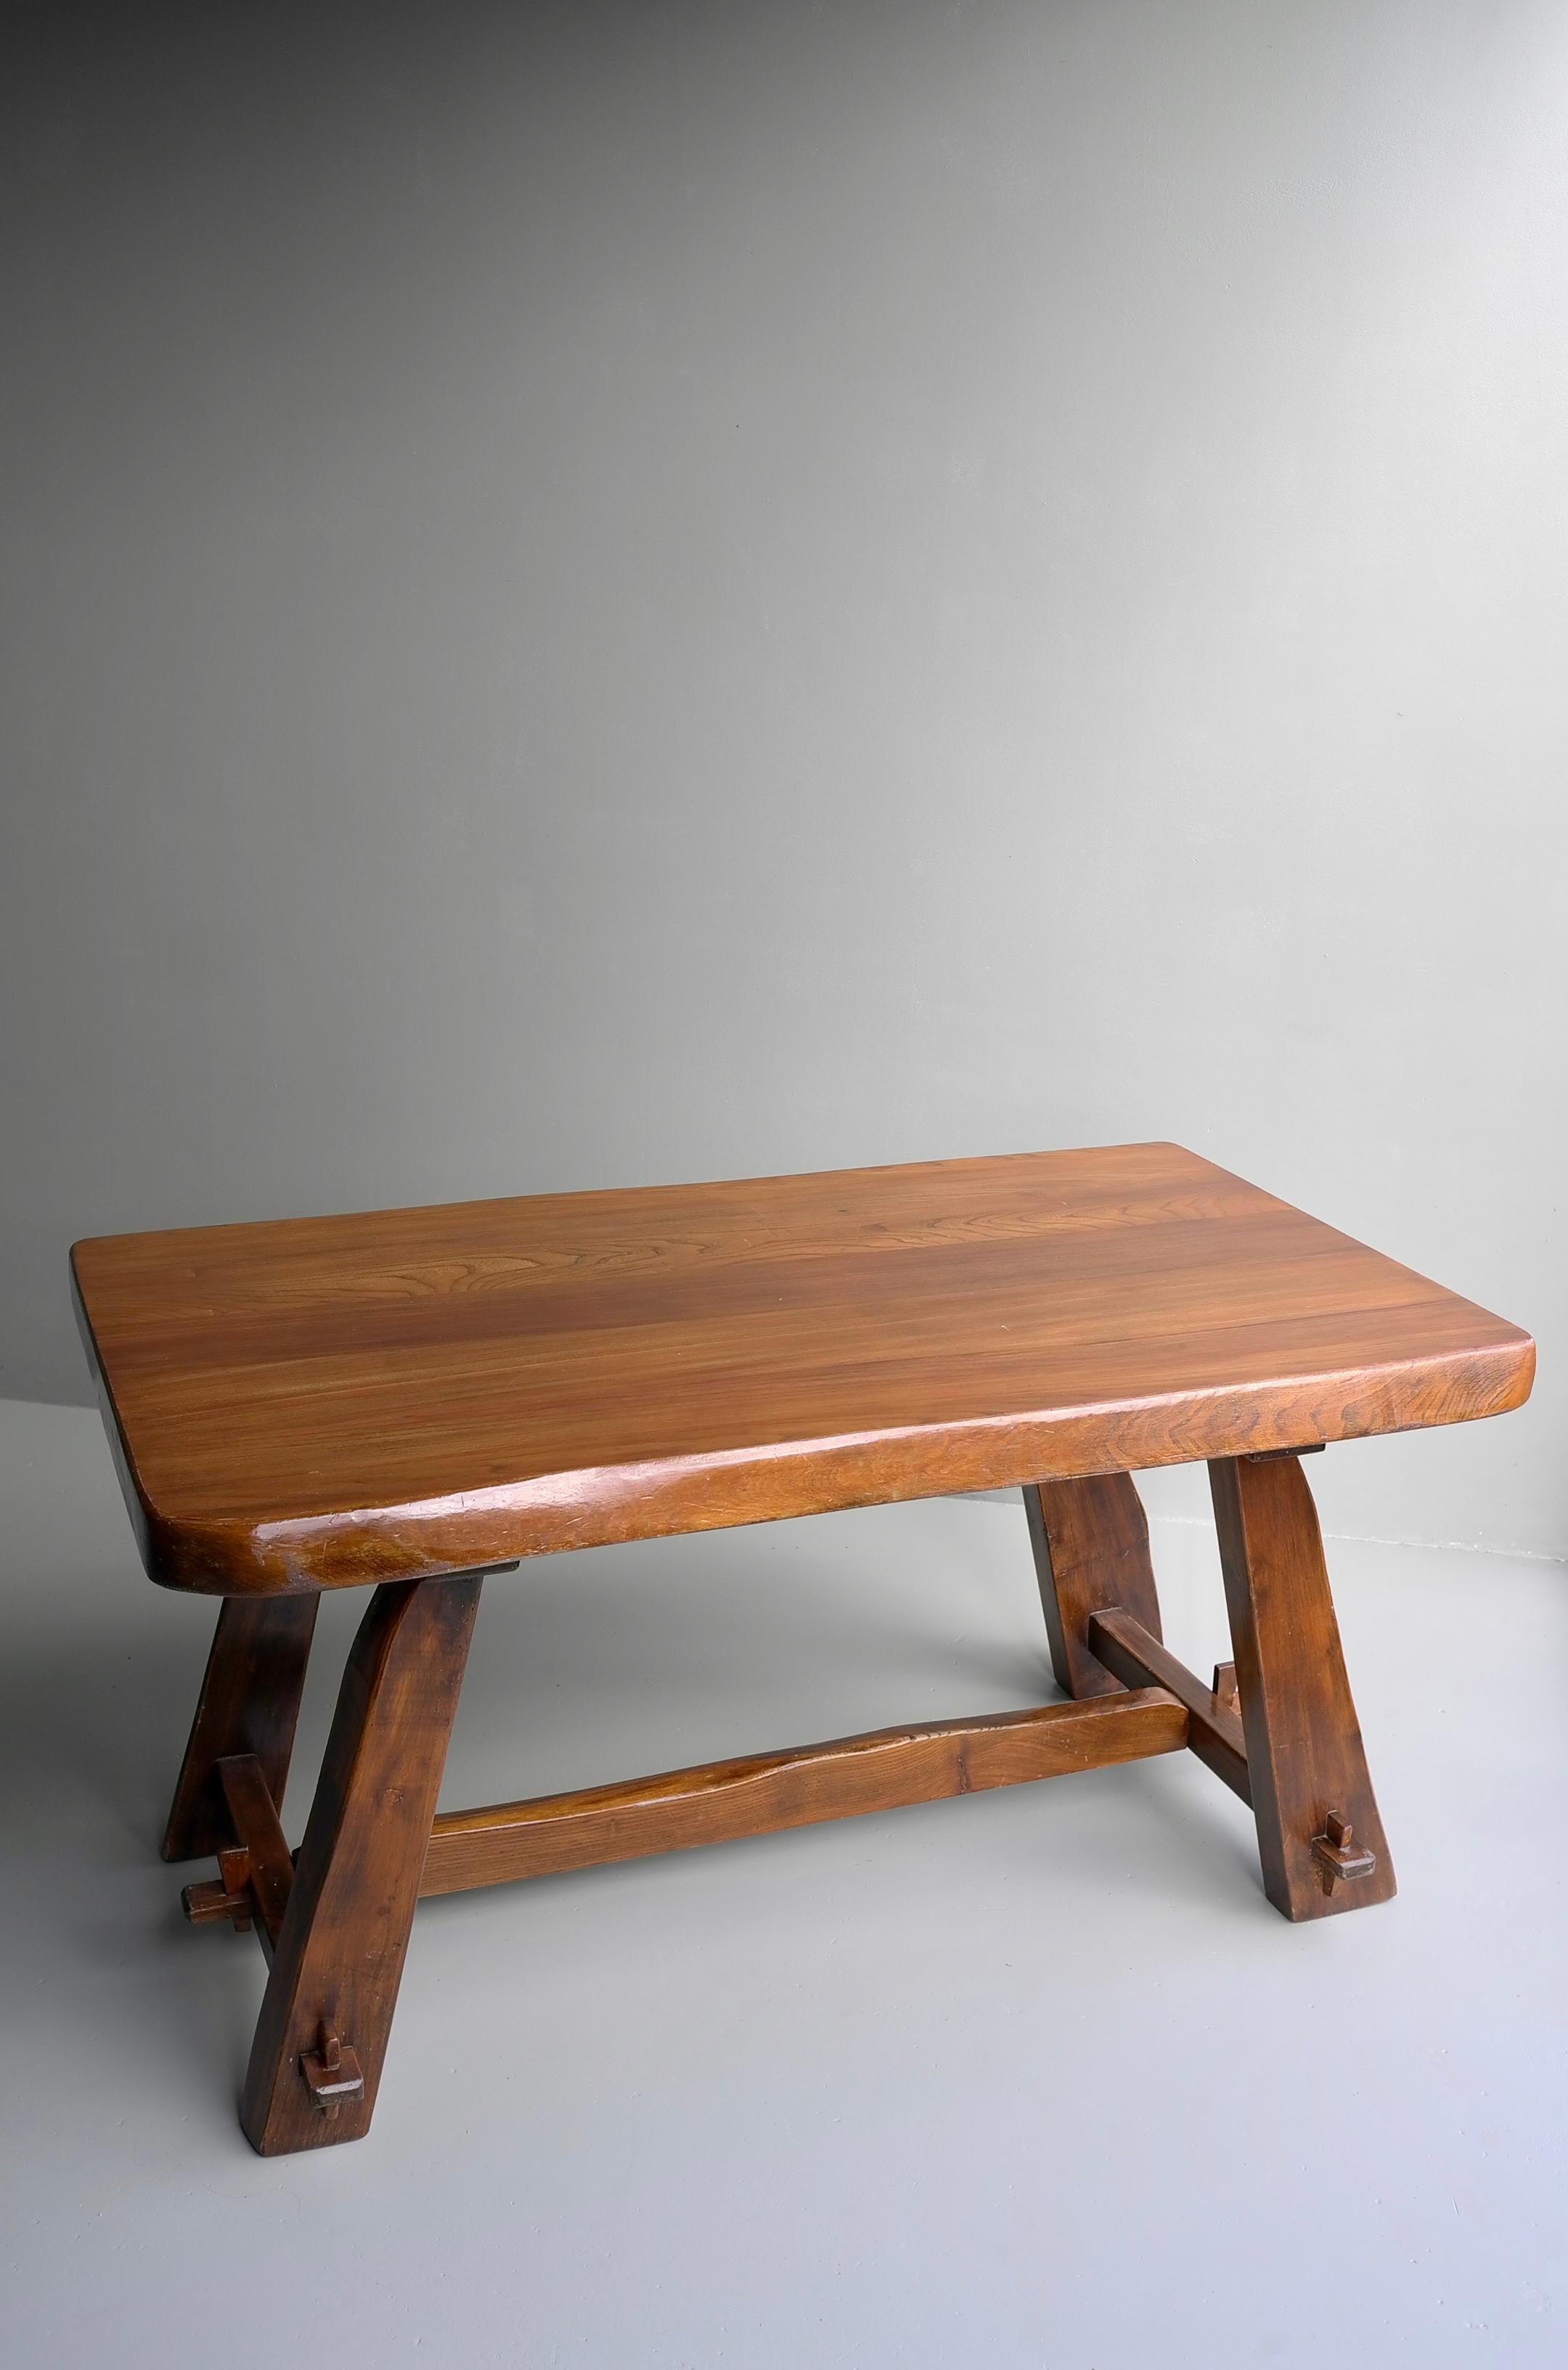 Organic Elmwood Dining Room Table by Aranjou, France 1960's For Sale 3